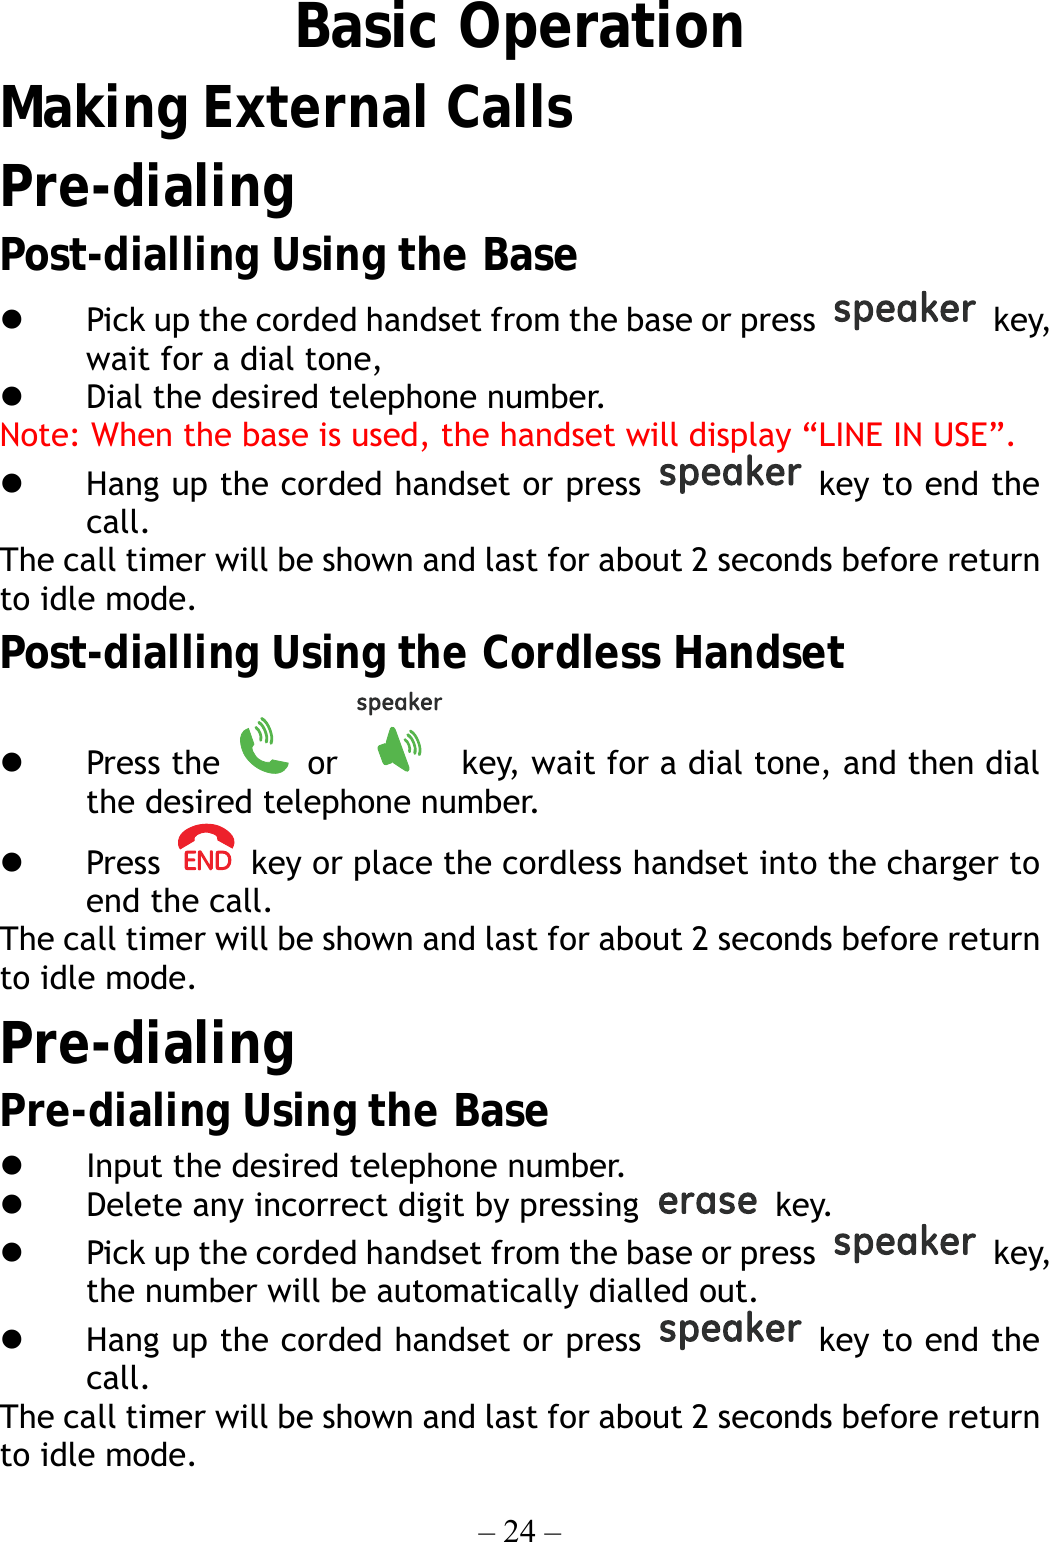 – 24 –   Basic Operation Making External Calls Pre-dialing Post-dialling Using the Base   Pick up the corded handset from the base or press   key, wait for a dial tone,     Dial the desired telephone number. Note: When the base is used, the handset will display “LINE IN USE”.   Hang up the corded handset or press   key to end the call. The call timer will be shown and last for about 2 seconds before return to idle mode. Post-dialling Using the Cordless Handset   Press the   or    key, wait for a dial tone, and then dial the desired telephone number.   Press    key or place the cordless handset into the charger to end the call. The call timer will be shown and last for about 2 seconds before return to idle mode. Pre-dialing Pre-dialing Using the Base   Input the desired telephone number.   Delete any incorrect digit by pressing   key.   Pick up the corded handset from the base or press   key, the number will be automatically dialled out.   Hang up the corded handset or press   key to end the call. The call timer will be shown and last for about 2 seconds before return to idle mode. 